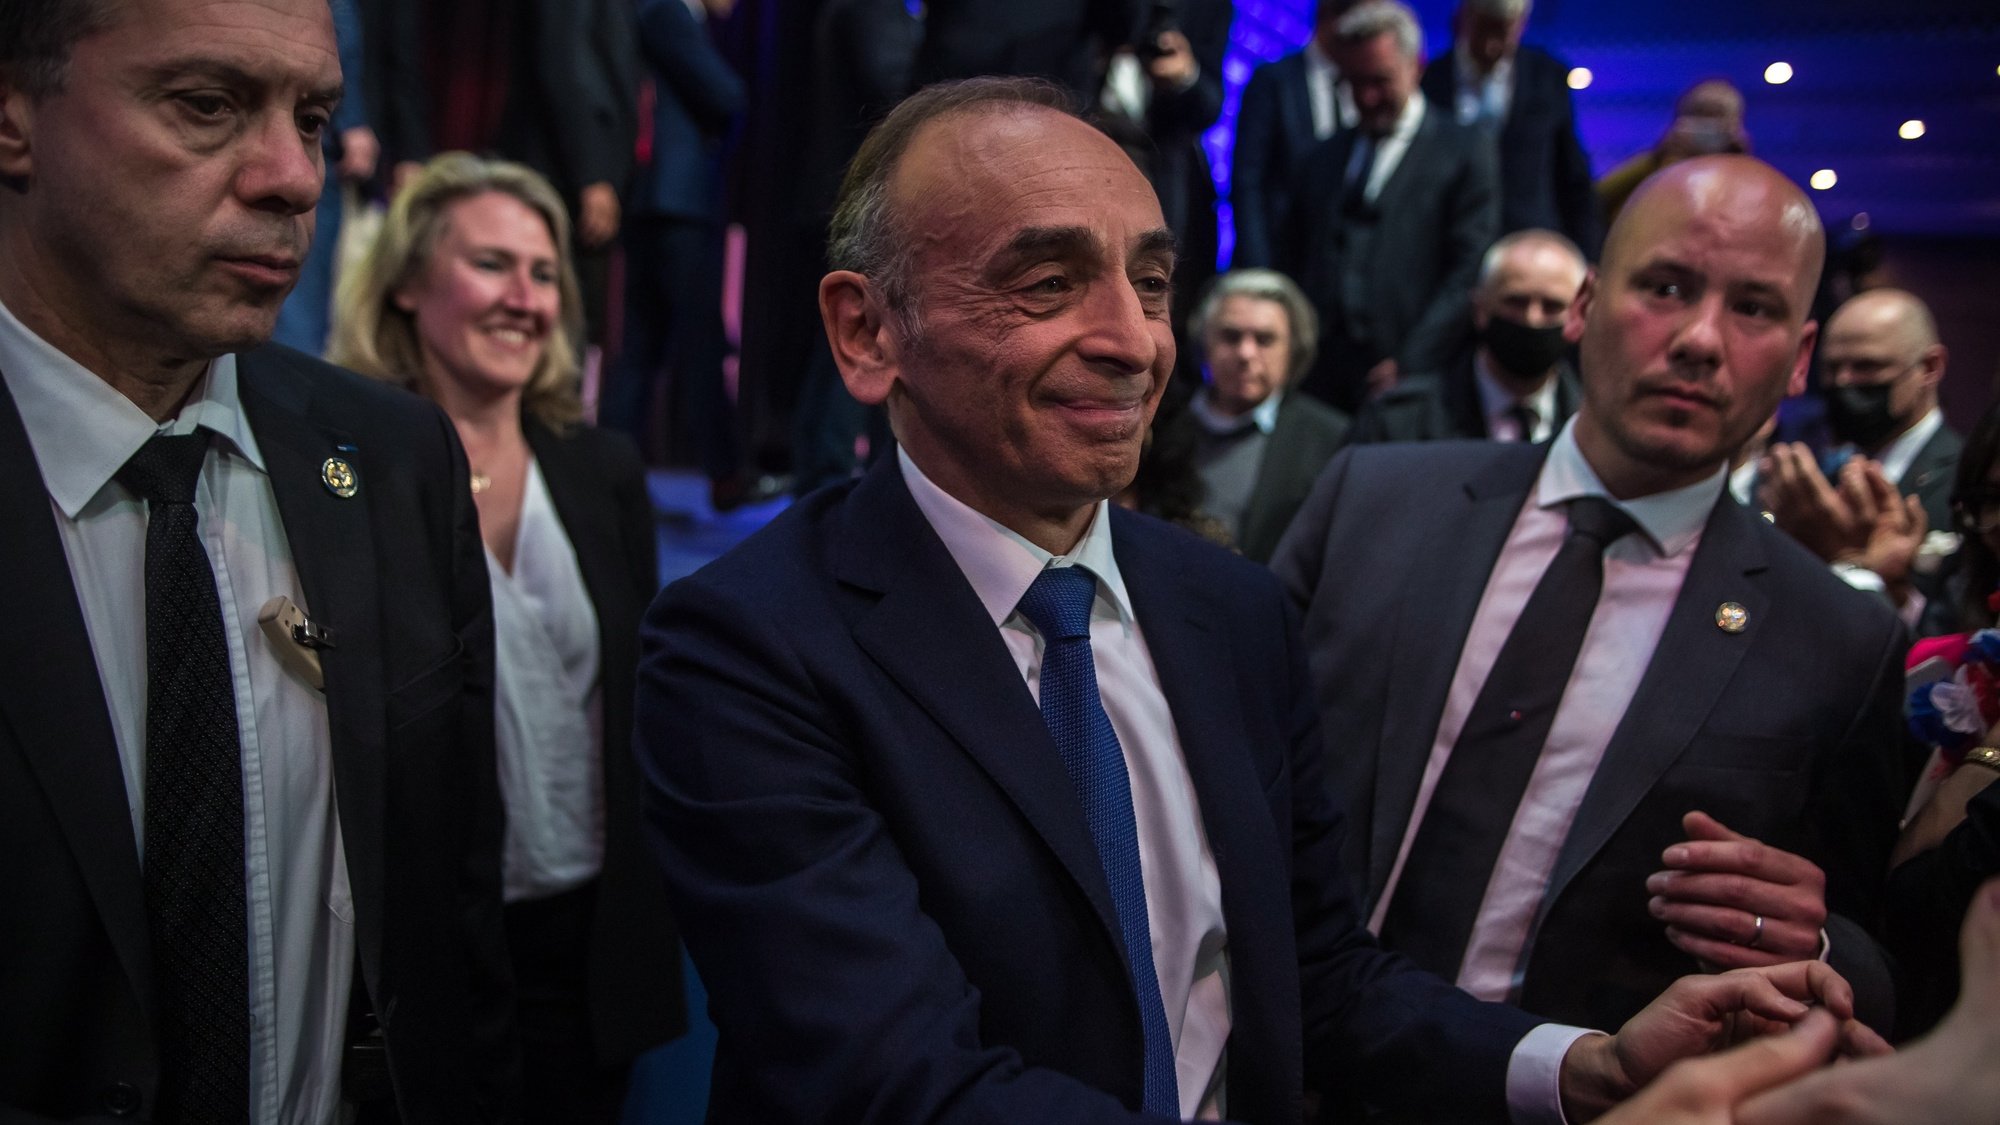 epa09883486 France&#039;s far-right party &#039;Reconquete!&#039; leader and candidate to the 2022 presidential election Eric Zemmour (C) greets his supporters after delivering a speech after the announcement of the results in the first round of the French presidential elections in Paris, France, 10 April 2022. Zemmour received around seven percent of votes.  EPA/CHRISTOPHE PETIT TESSON